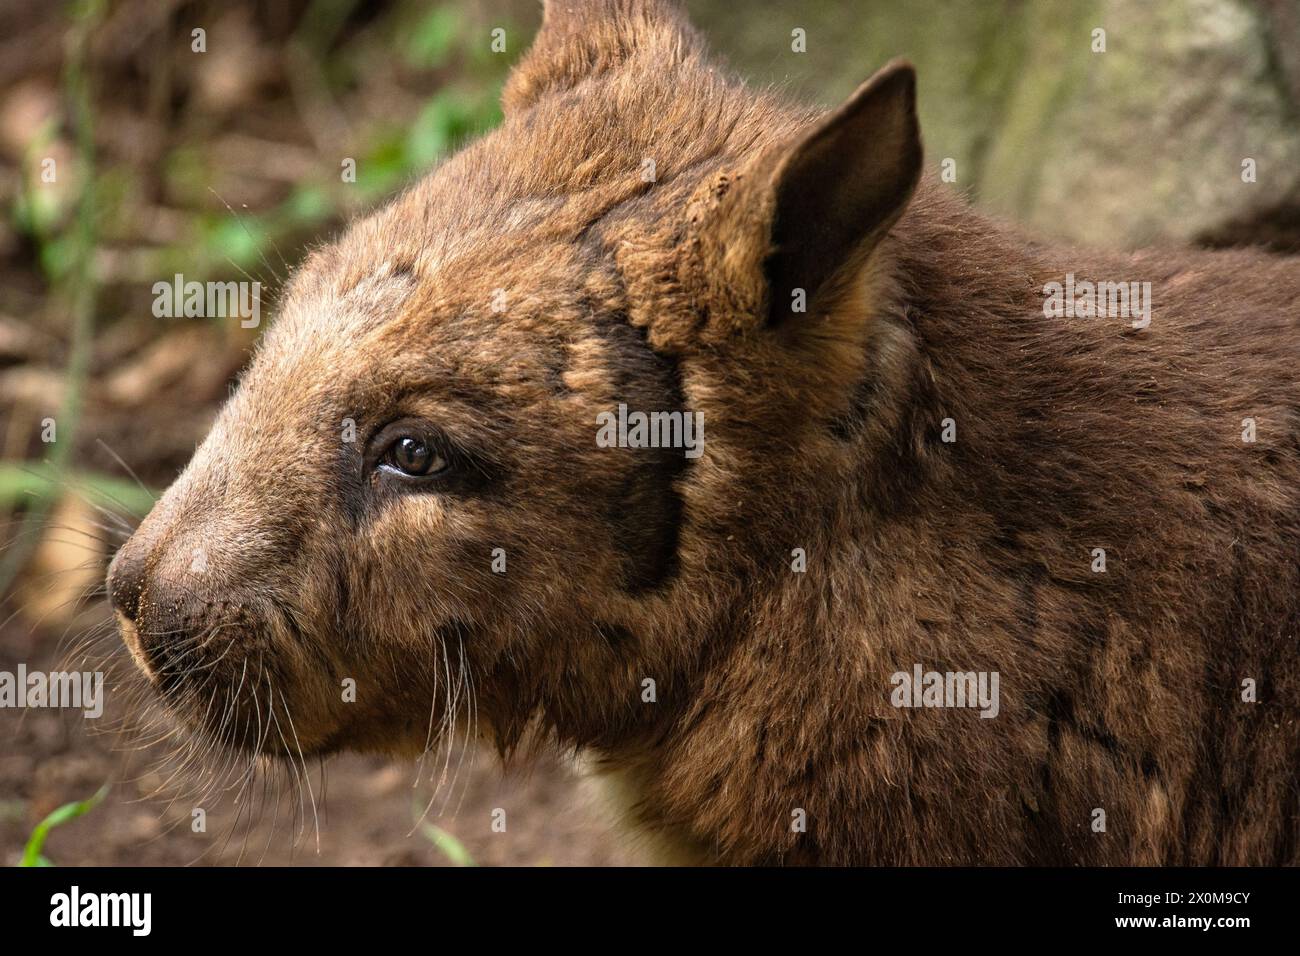 The southern hairy-nosed wombat is one of three extant species of wombats. It is found in scattered areas of semiarid scrub and mallee from the easter Stock Photo